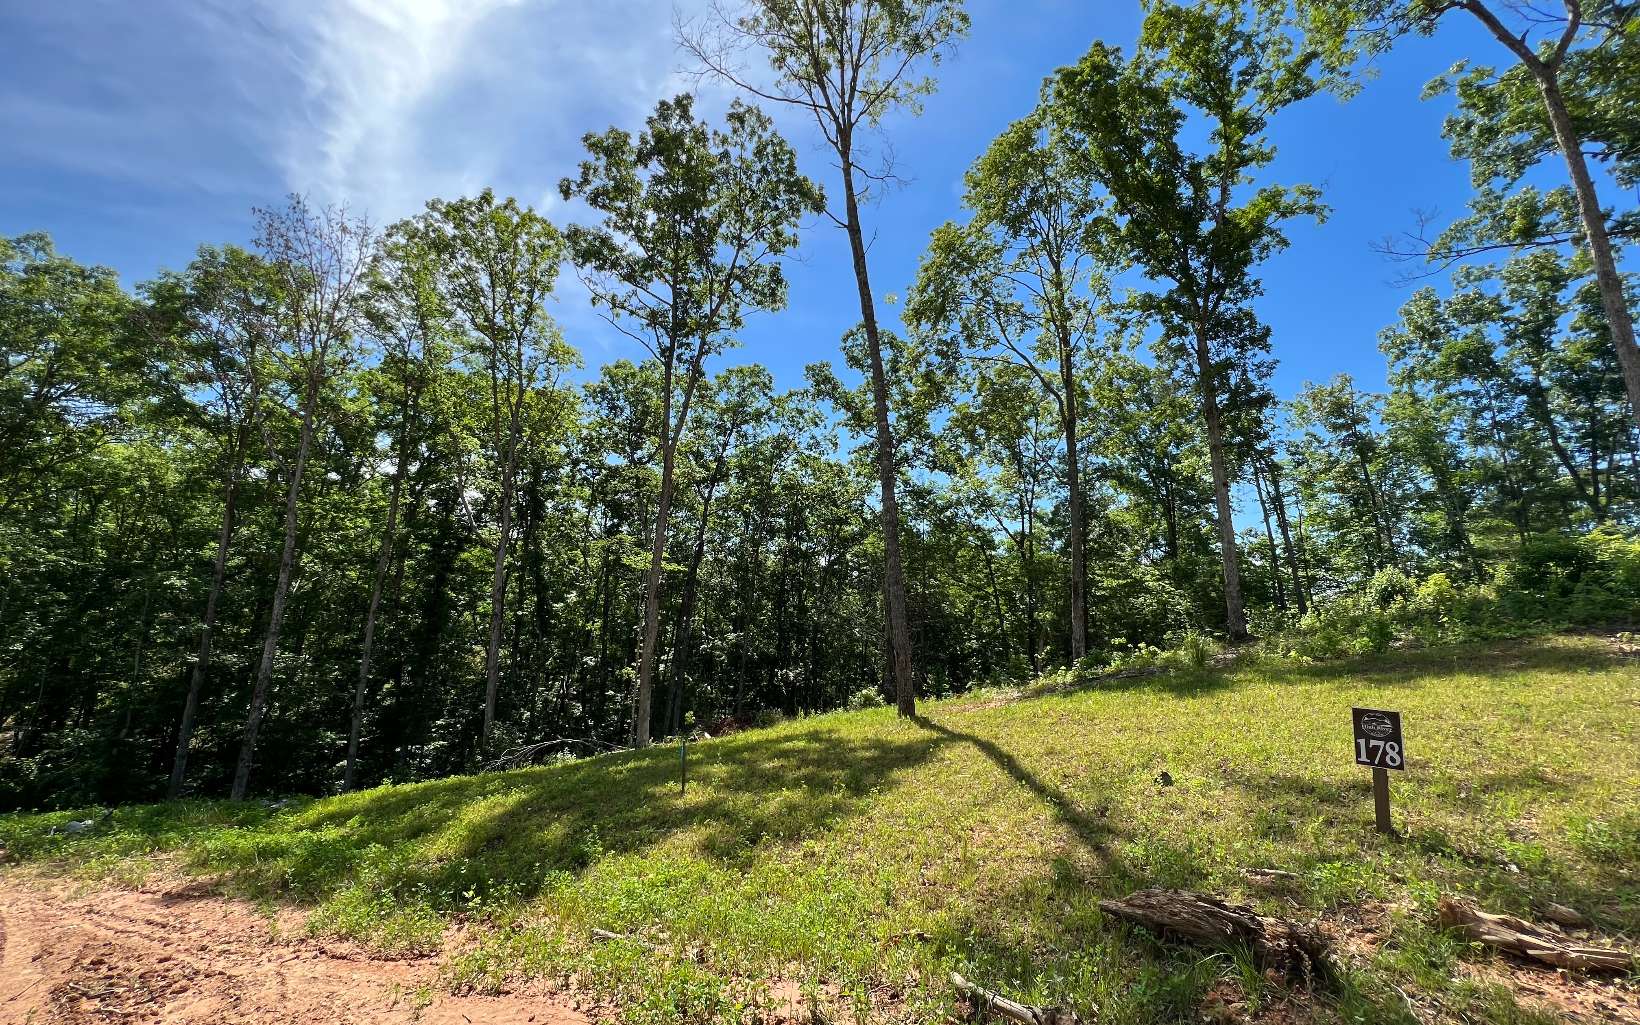 Ready to build your mountain dream home? Well I have the perfect spot for you! This beautiful 3.35 acre lot is located in one of Ellijay's newest and most desirable subdivisions, High River. High River has all paved roads, a riverfront clubhouse, trophy trout stream access, a small lake, parks, and walking trails! Escape to the mountains, just 15 minutes to Downtown Ellijay where there are several places to shop and eat!